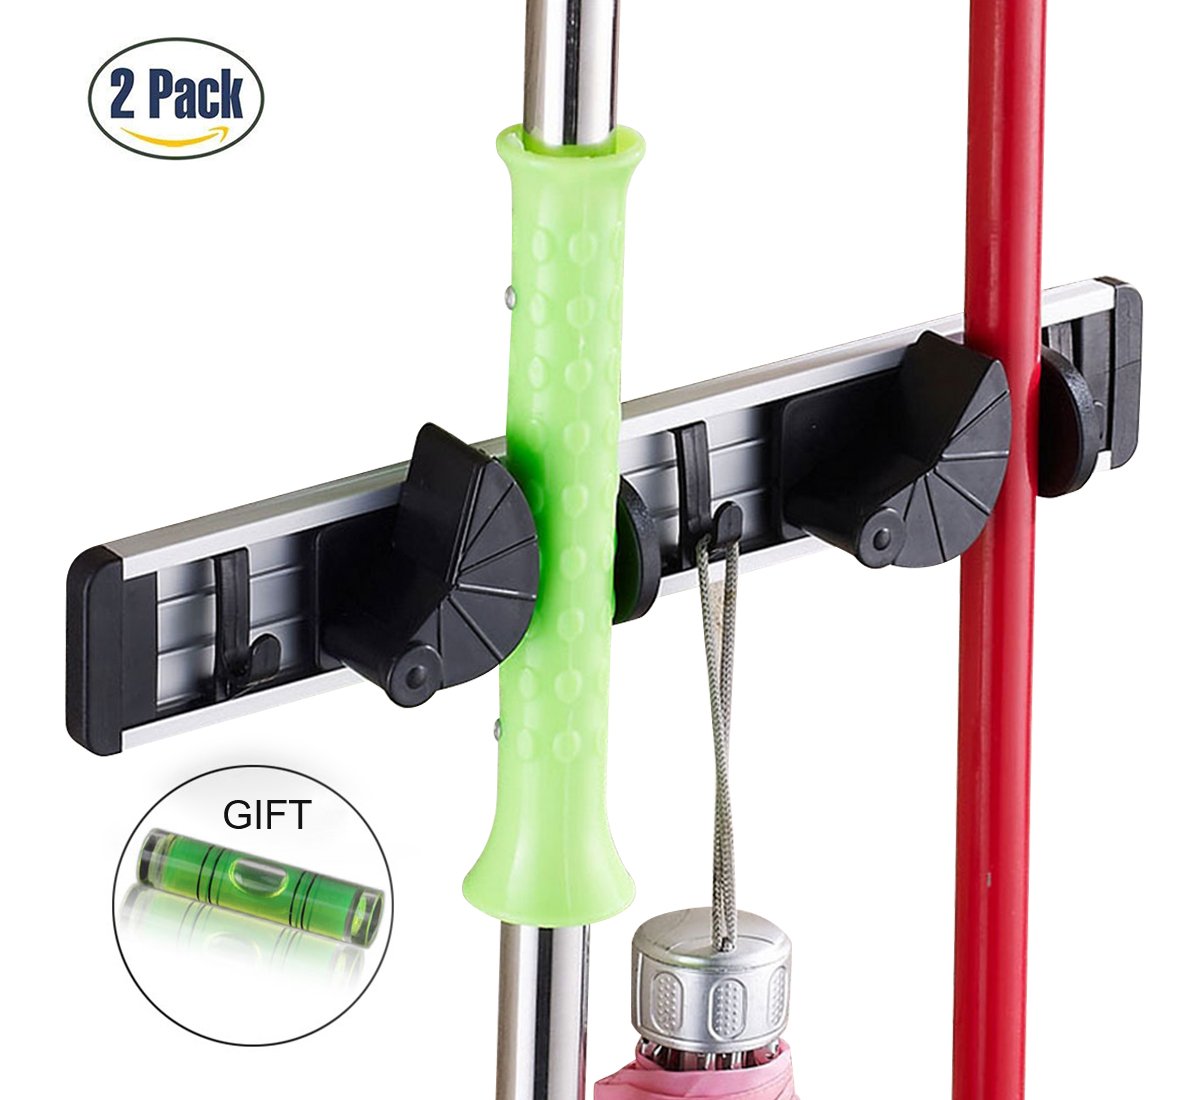 Xcellent Global 2 PCS Broom Mop Holder Wall Mounted Garage Storage Organizer - Totally 4 Positions 6 Hooks HG125